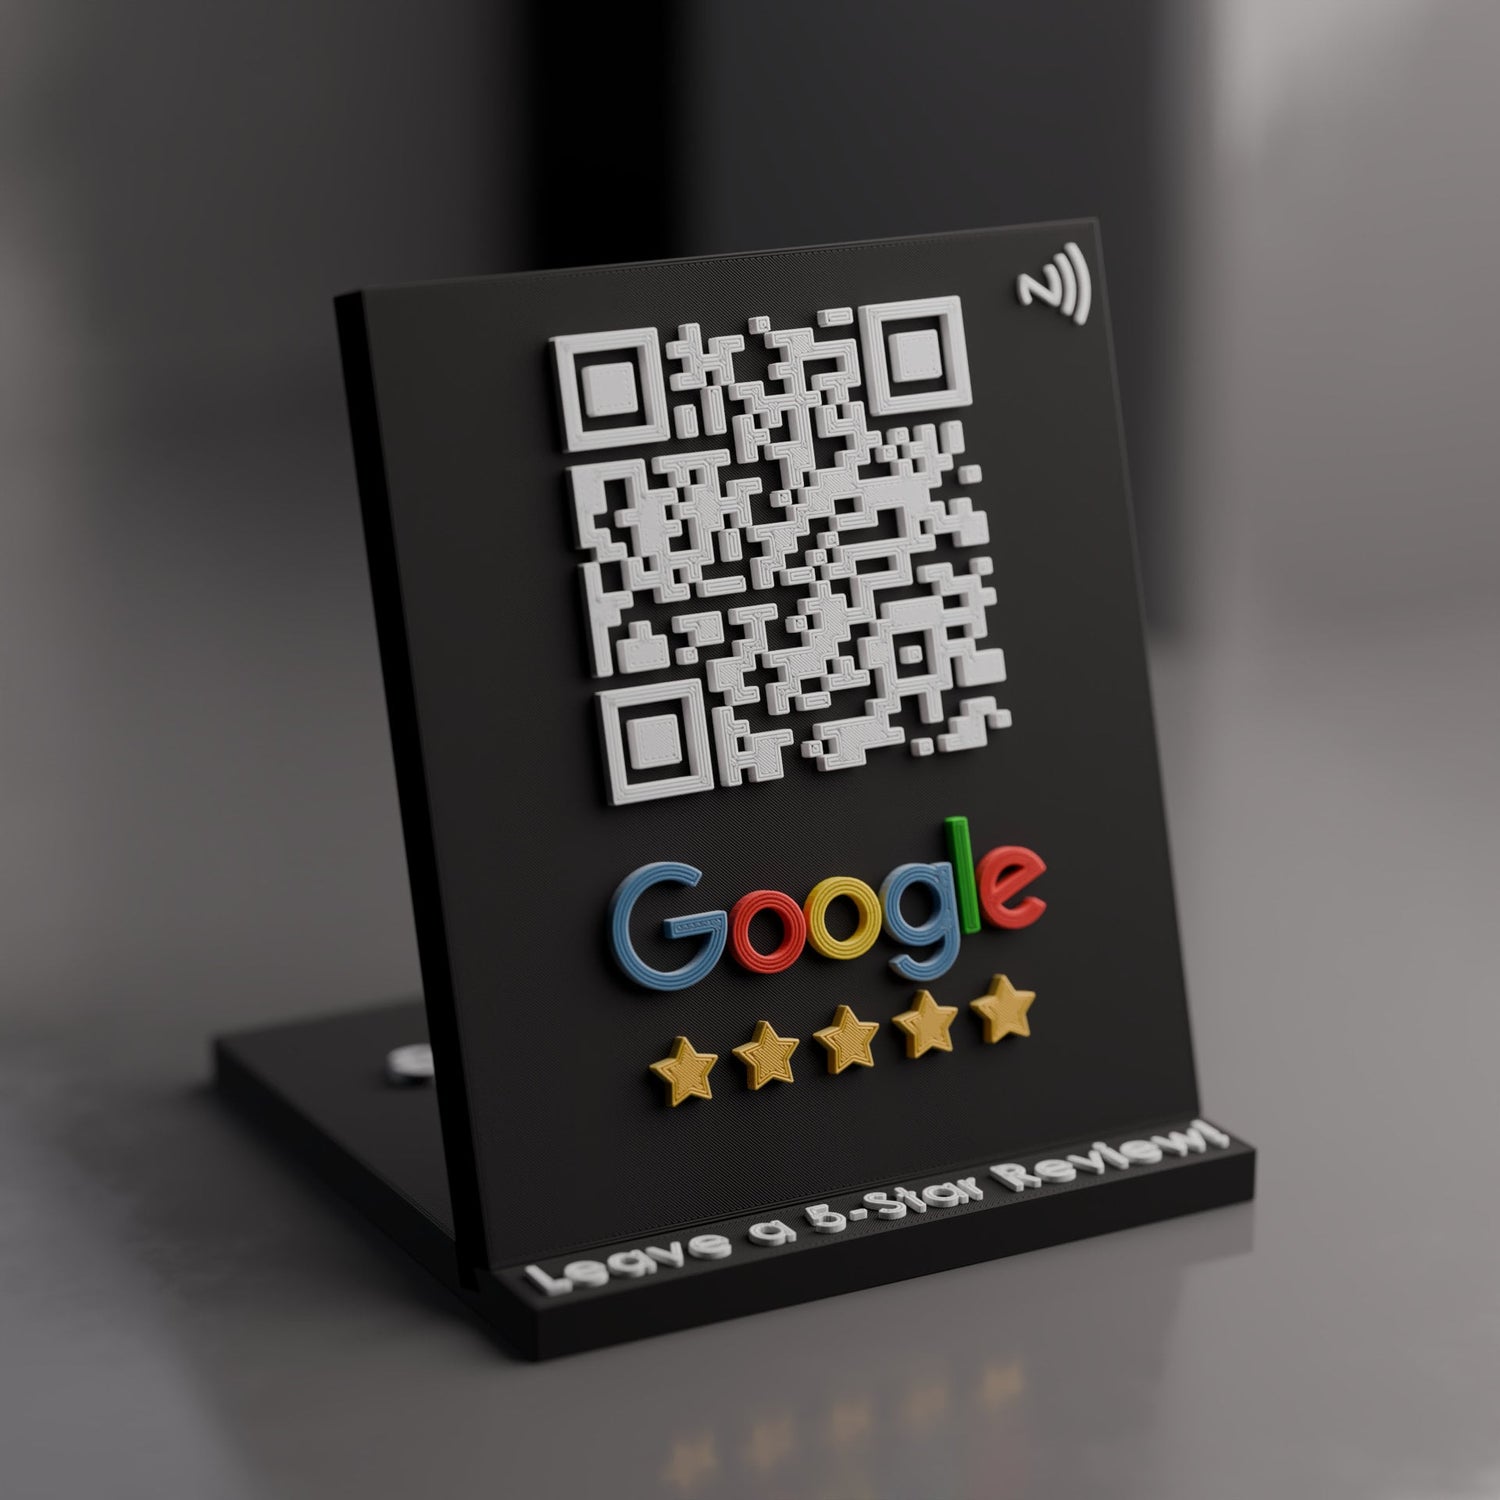 Google review example of 20 Pack of Classic Qr Code Stands with NFC Chip - Get google reviews, boost website traffic, advertise social medias, and market your brand better.